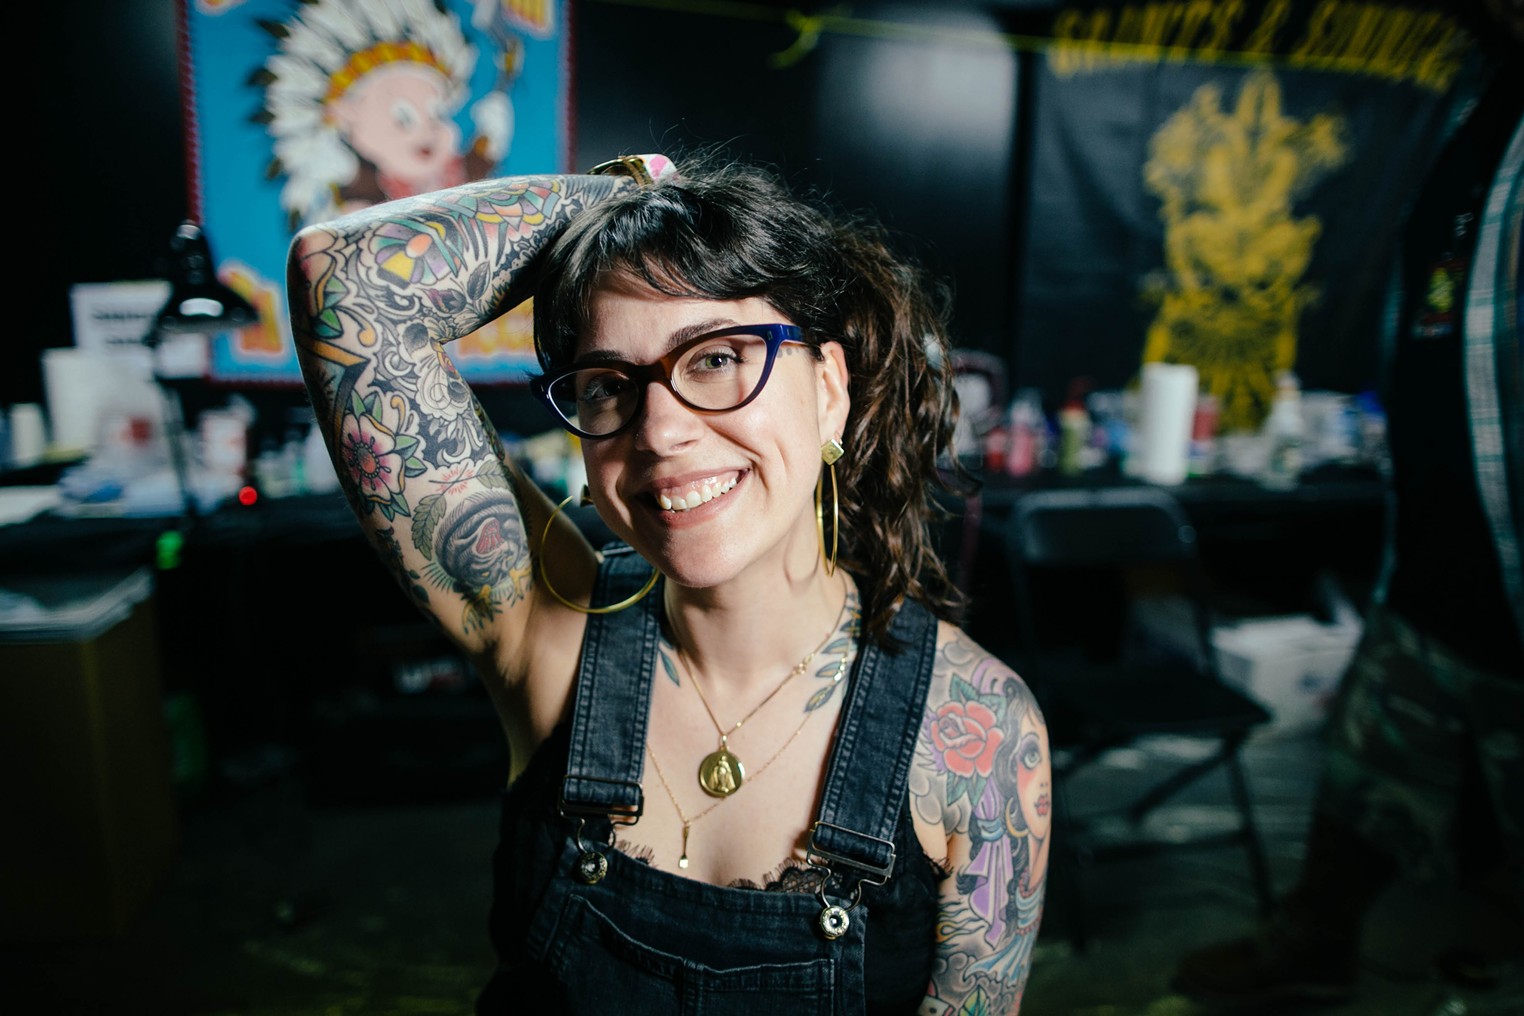 Ranked: North Texas' best tattoo shops according to Yelp